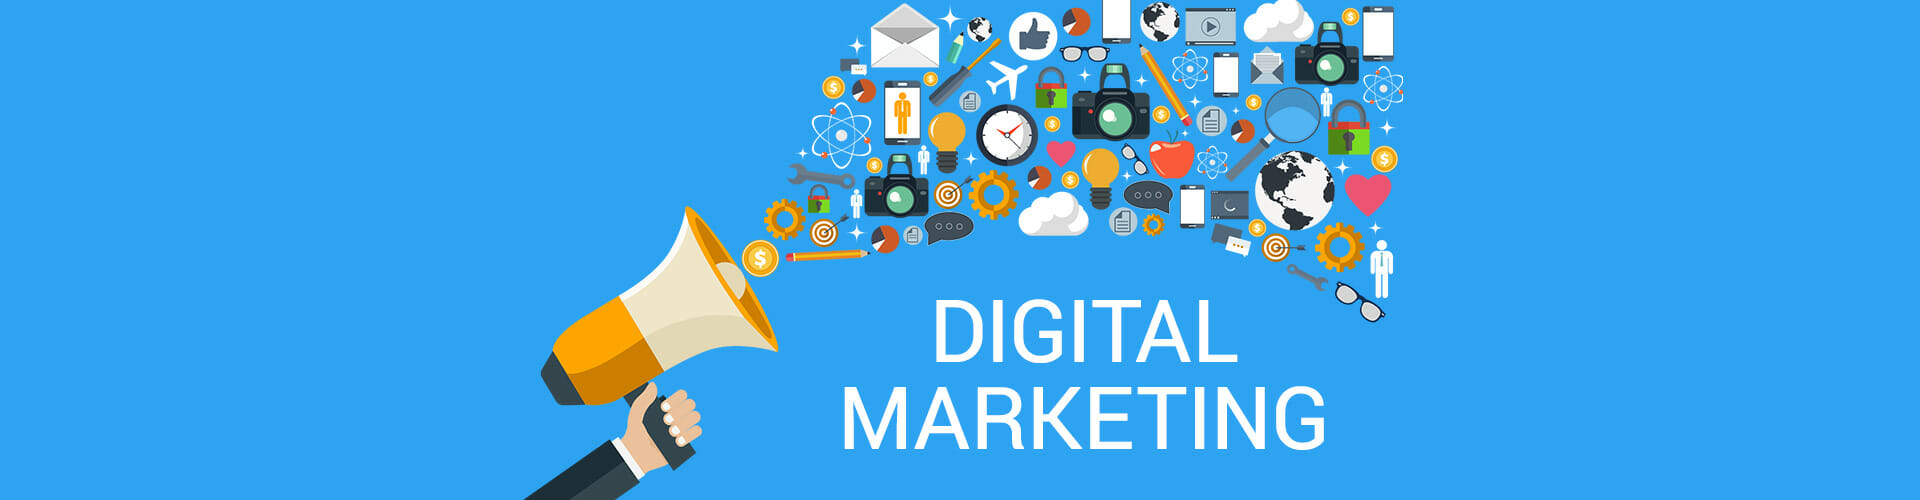 Advanced Digital Marketing Tips For Your Business In 2019